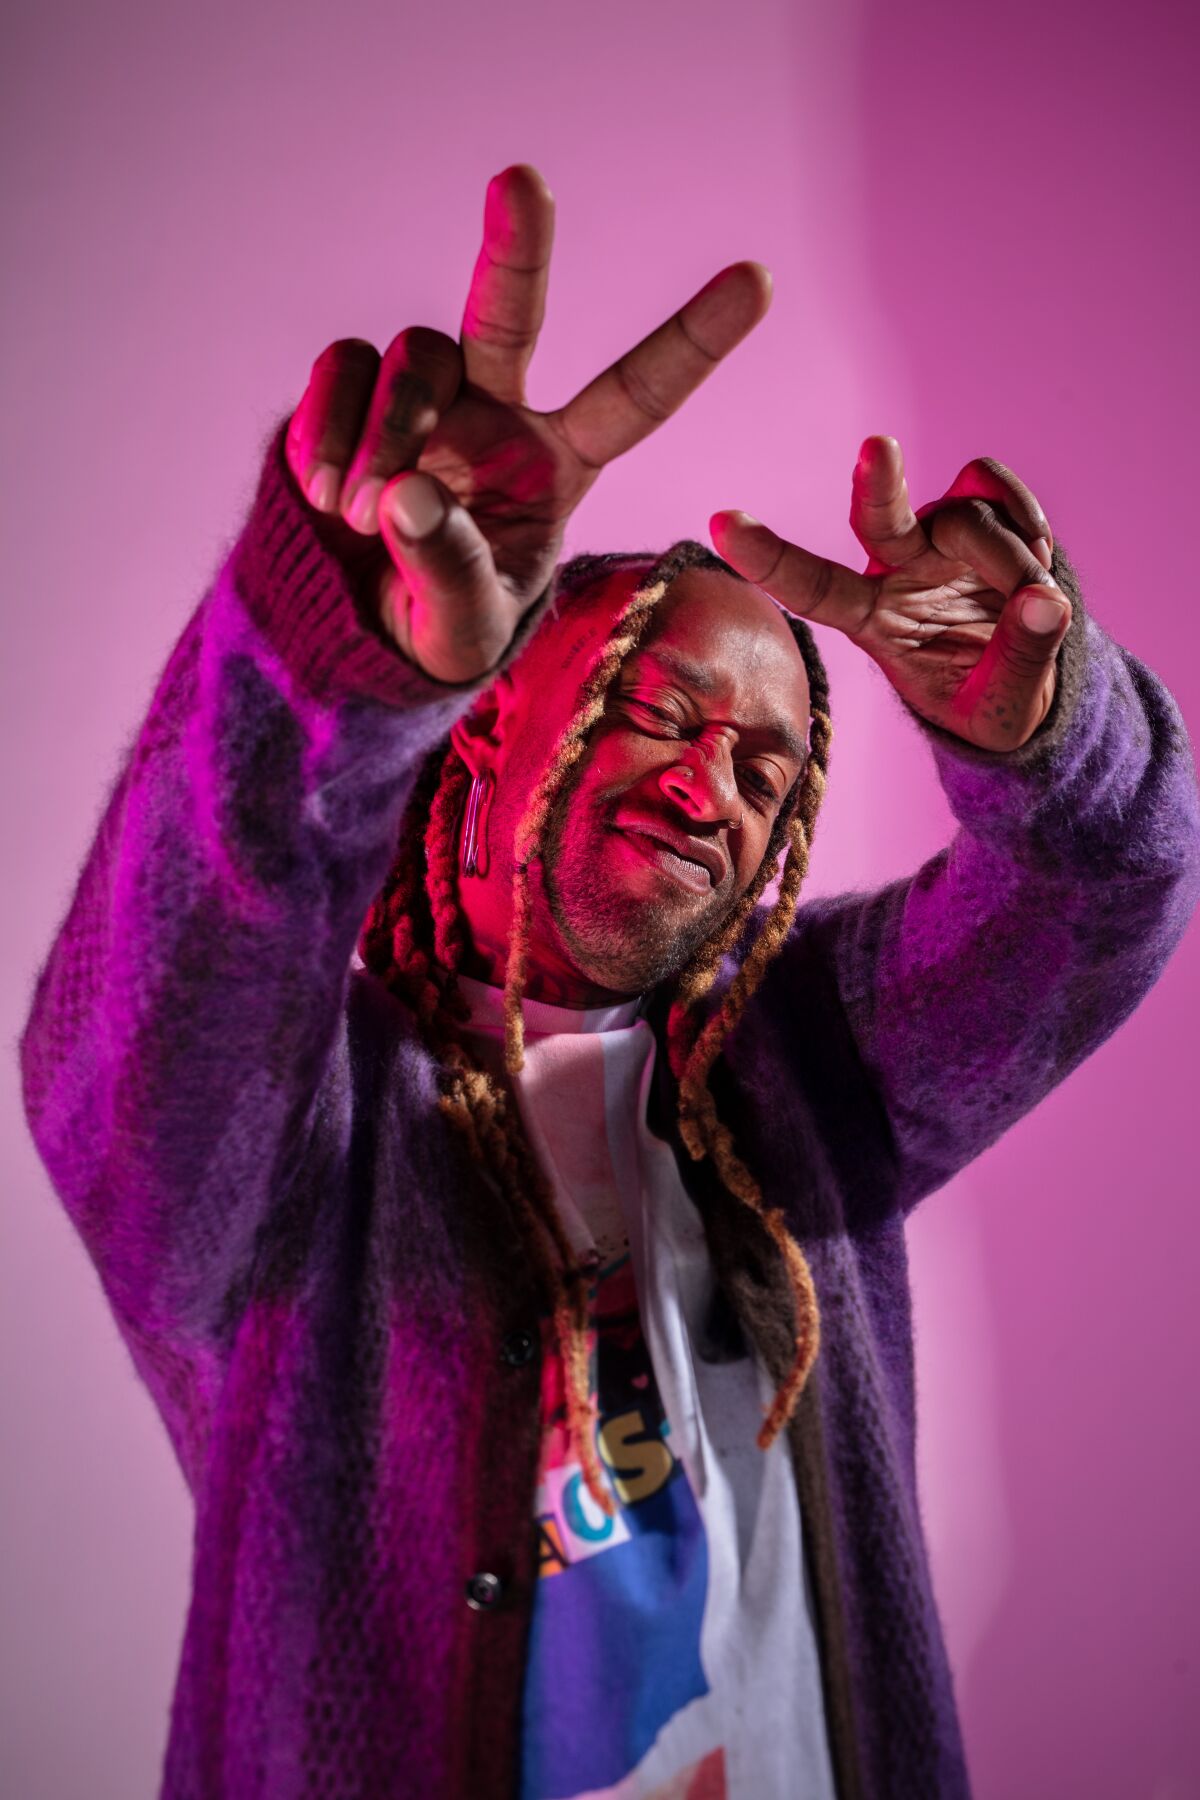  Rapper Ty Dolla Sign at a Hollywood Hills home on Sept. 17, 2020.